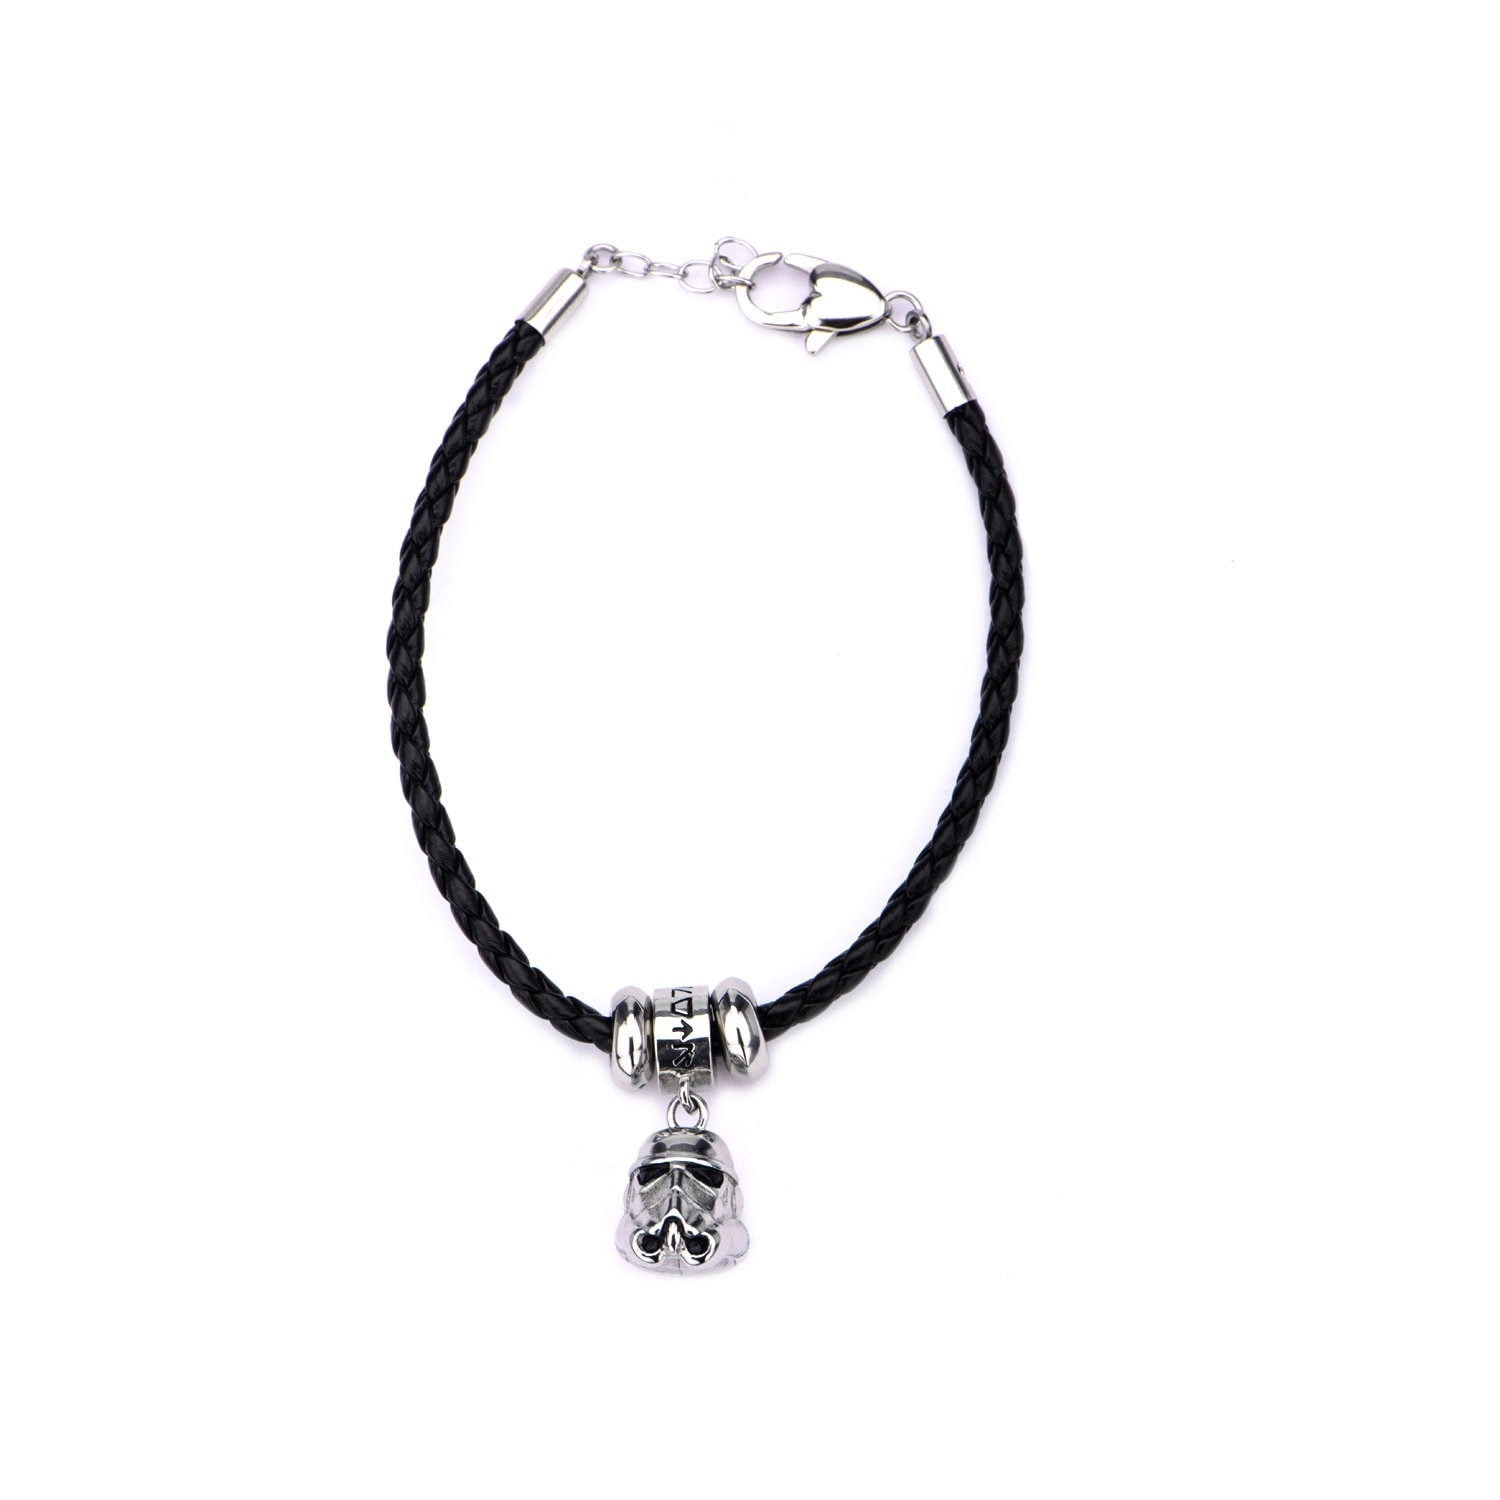 Star Wars Stormtrooper Stainless Steel Pendant Bracelet with 7 1/2 Inch Chain 